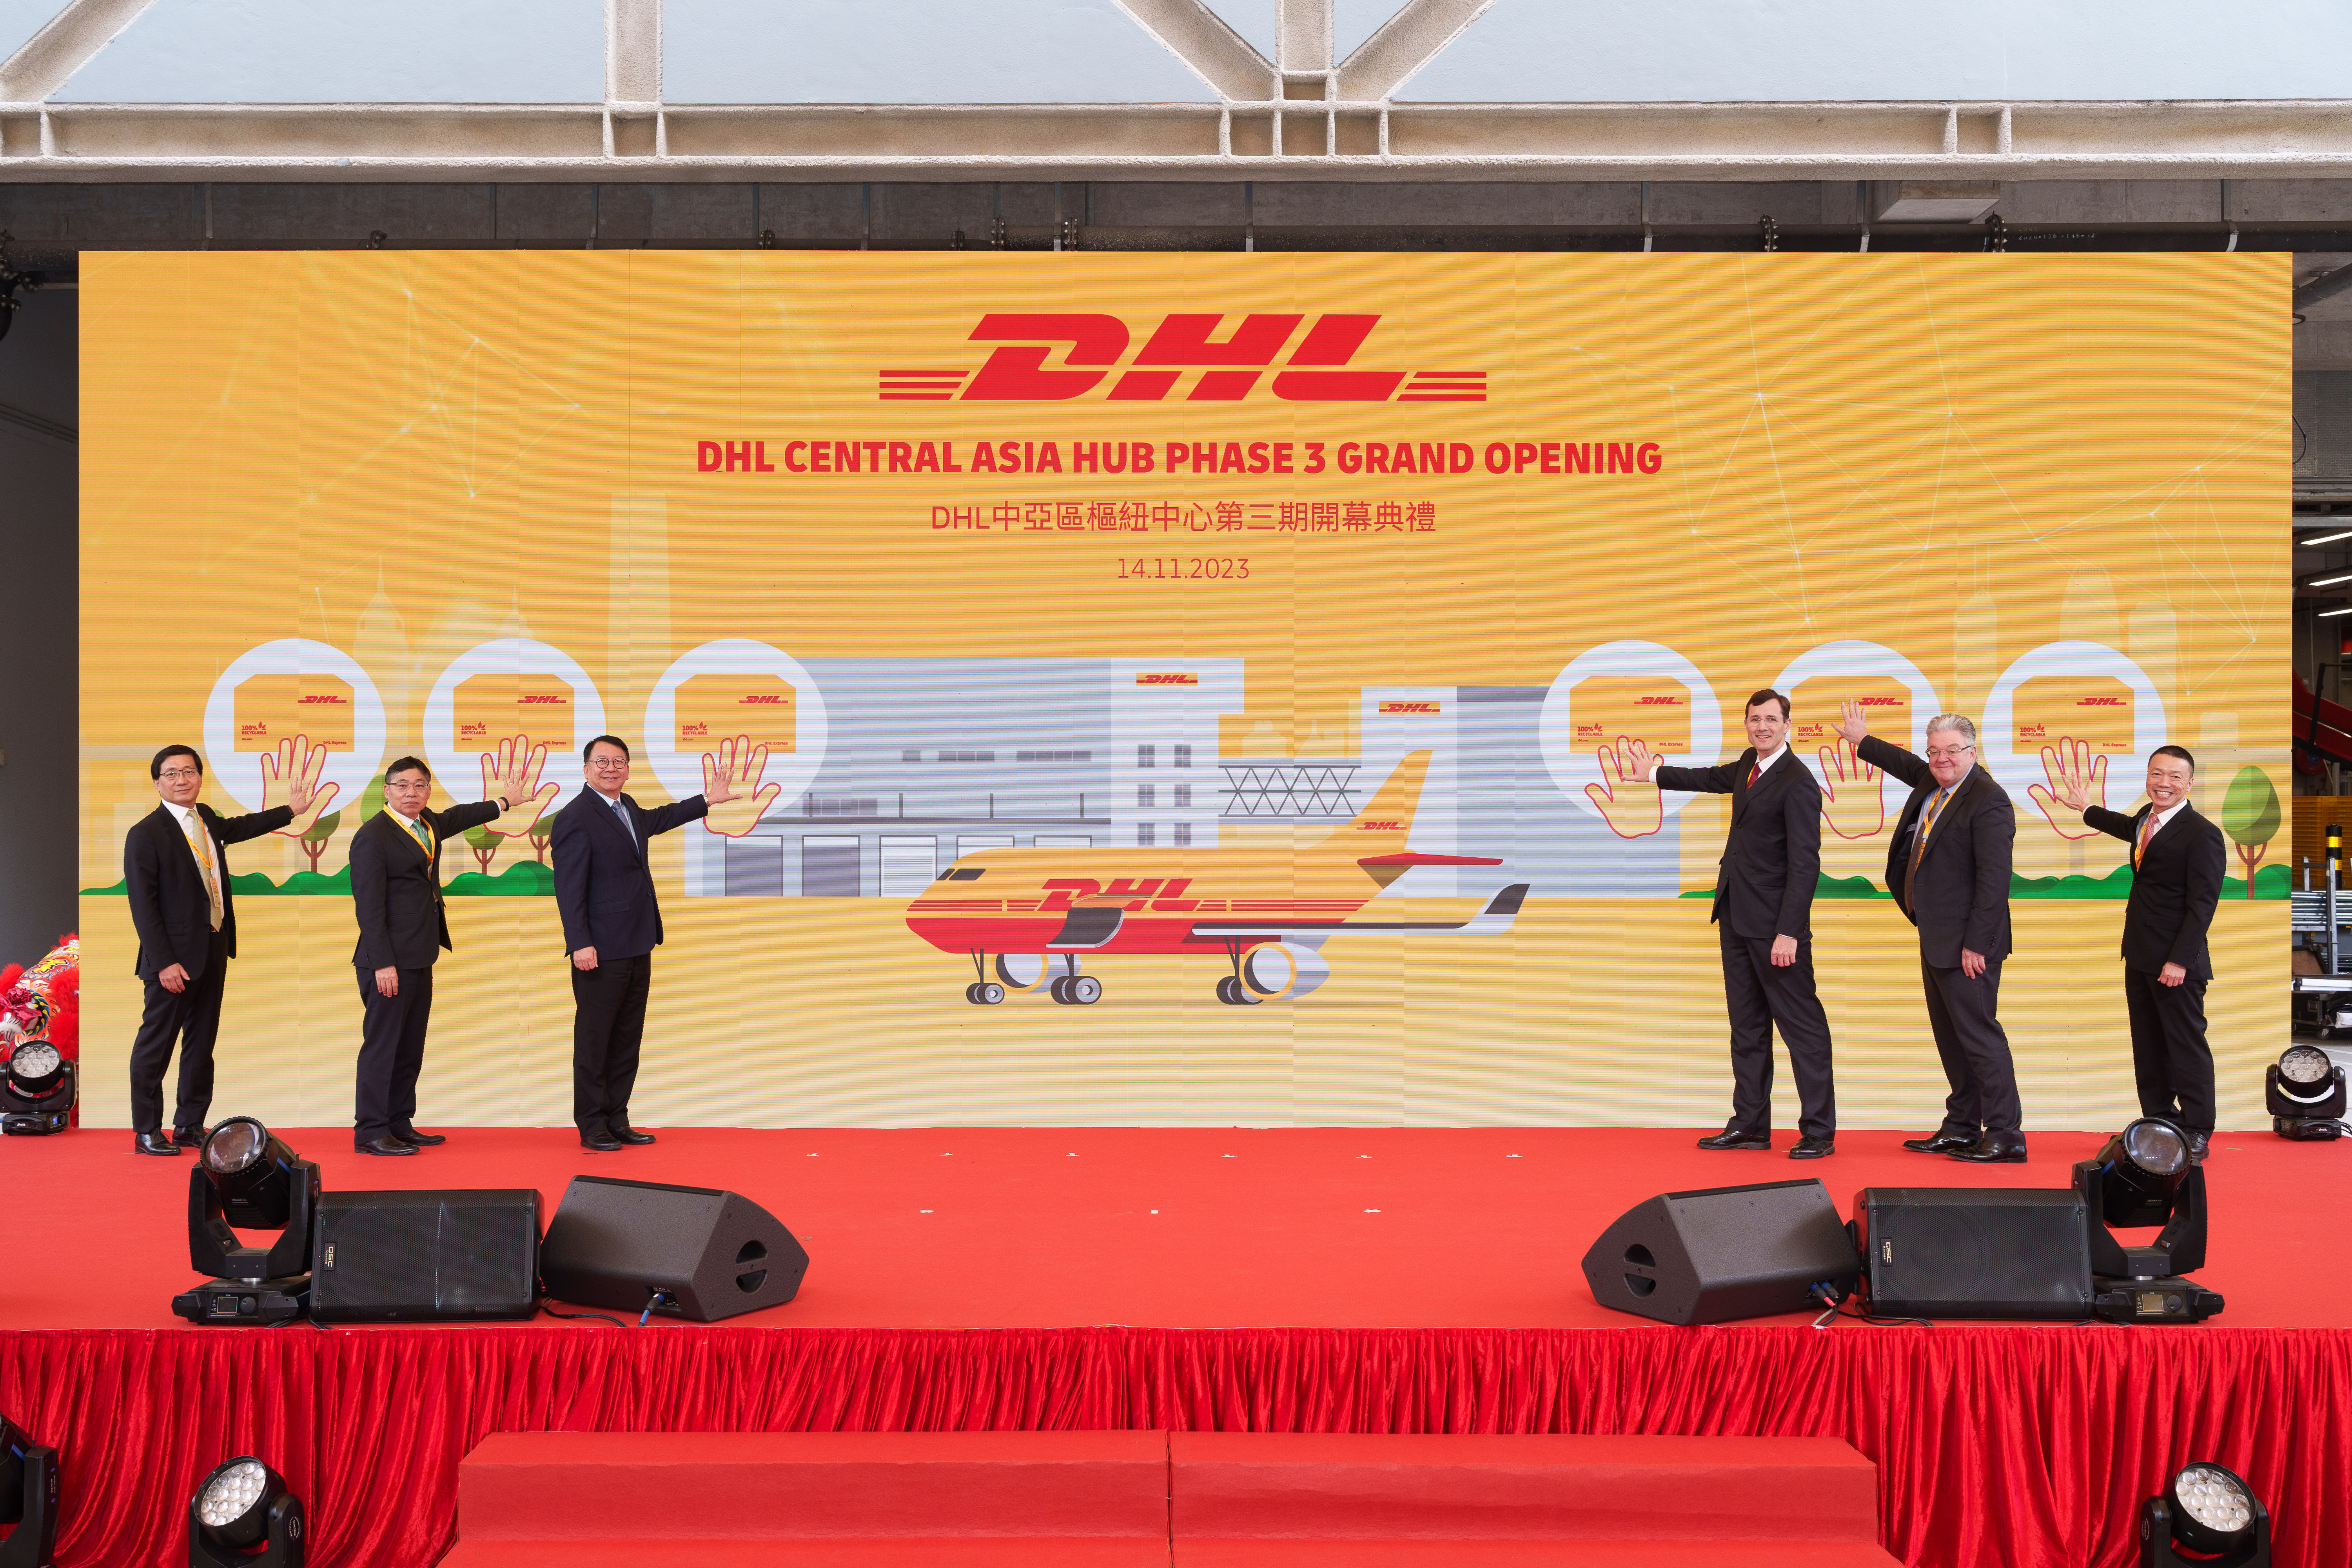 DHL Express today announces the opening of the newly expanded Central Asia Hub in Hong Kong. The total investment into the Central Asia Hub is EUR 562 million, emphasizing DHL's commitment to the development of Hong Kong as an international aviation hub. Officiating guests include: KK Chan, Chief Secretary for Administration of the Government of the Hong Kong Special Administrative (third from left);Lam Sai-hung, Secretary for Transport and Logistics of the Government of the Hong Kong Special Administrative (second from left);Fred Lam, CEO of Airport Authority Hong Kong (first from left);Tobias Meyer, CEO of DHL Group (third from right);John Pearson, CEO of DHL Express (second from right); andKen Lee, CEO of DHL Express Asia Pacific (first from right).